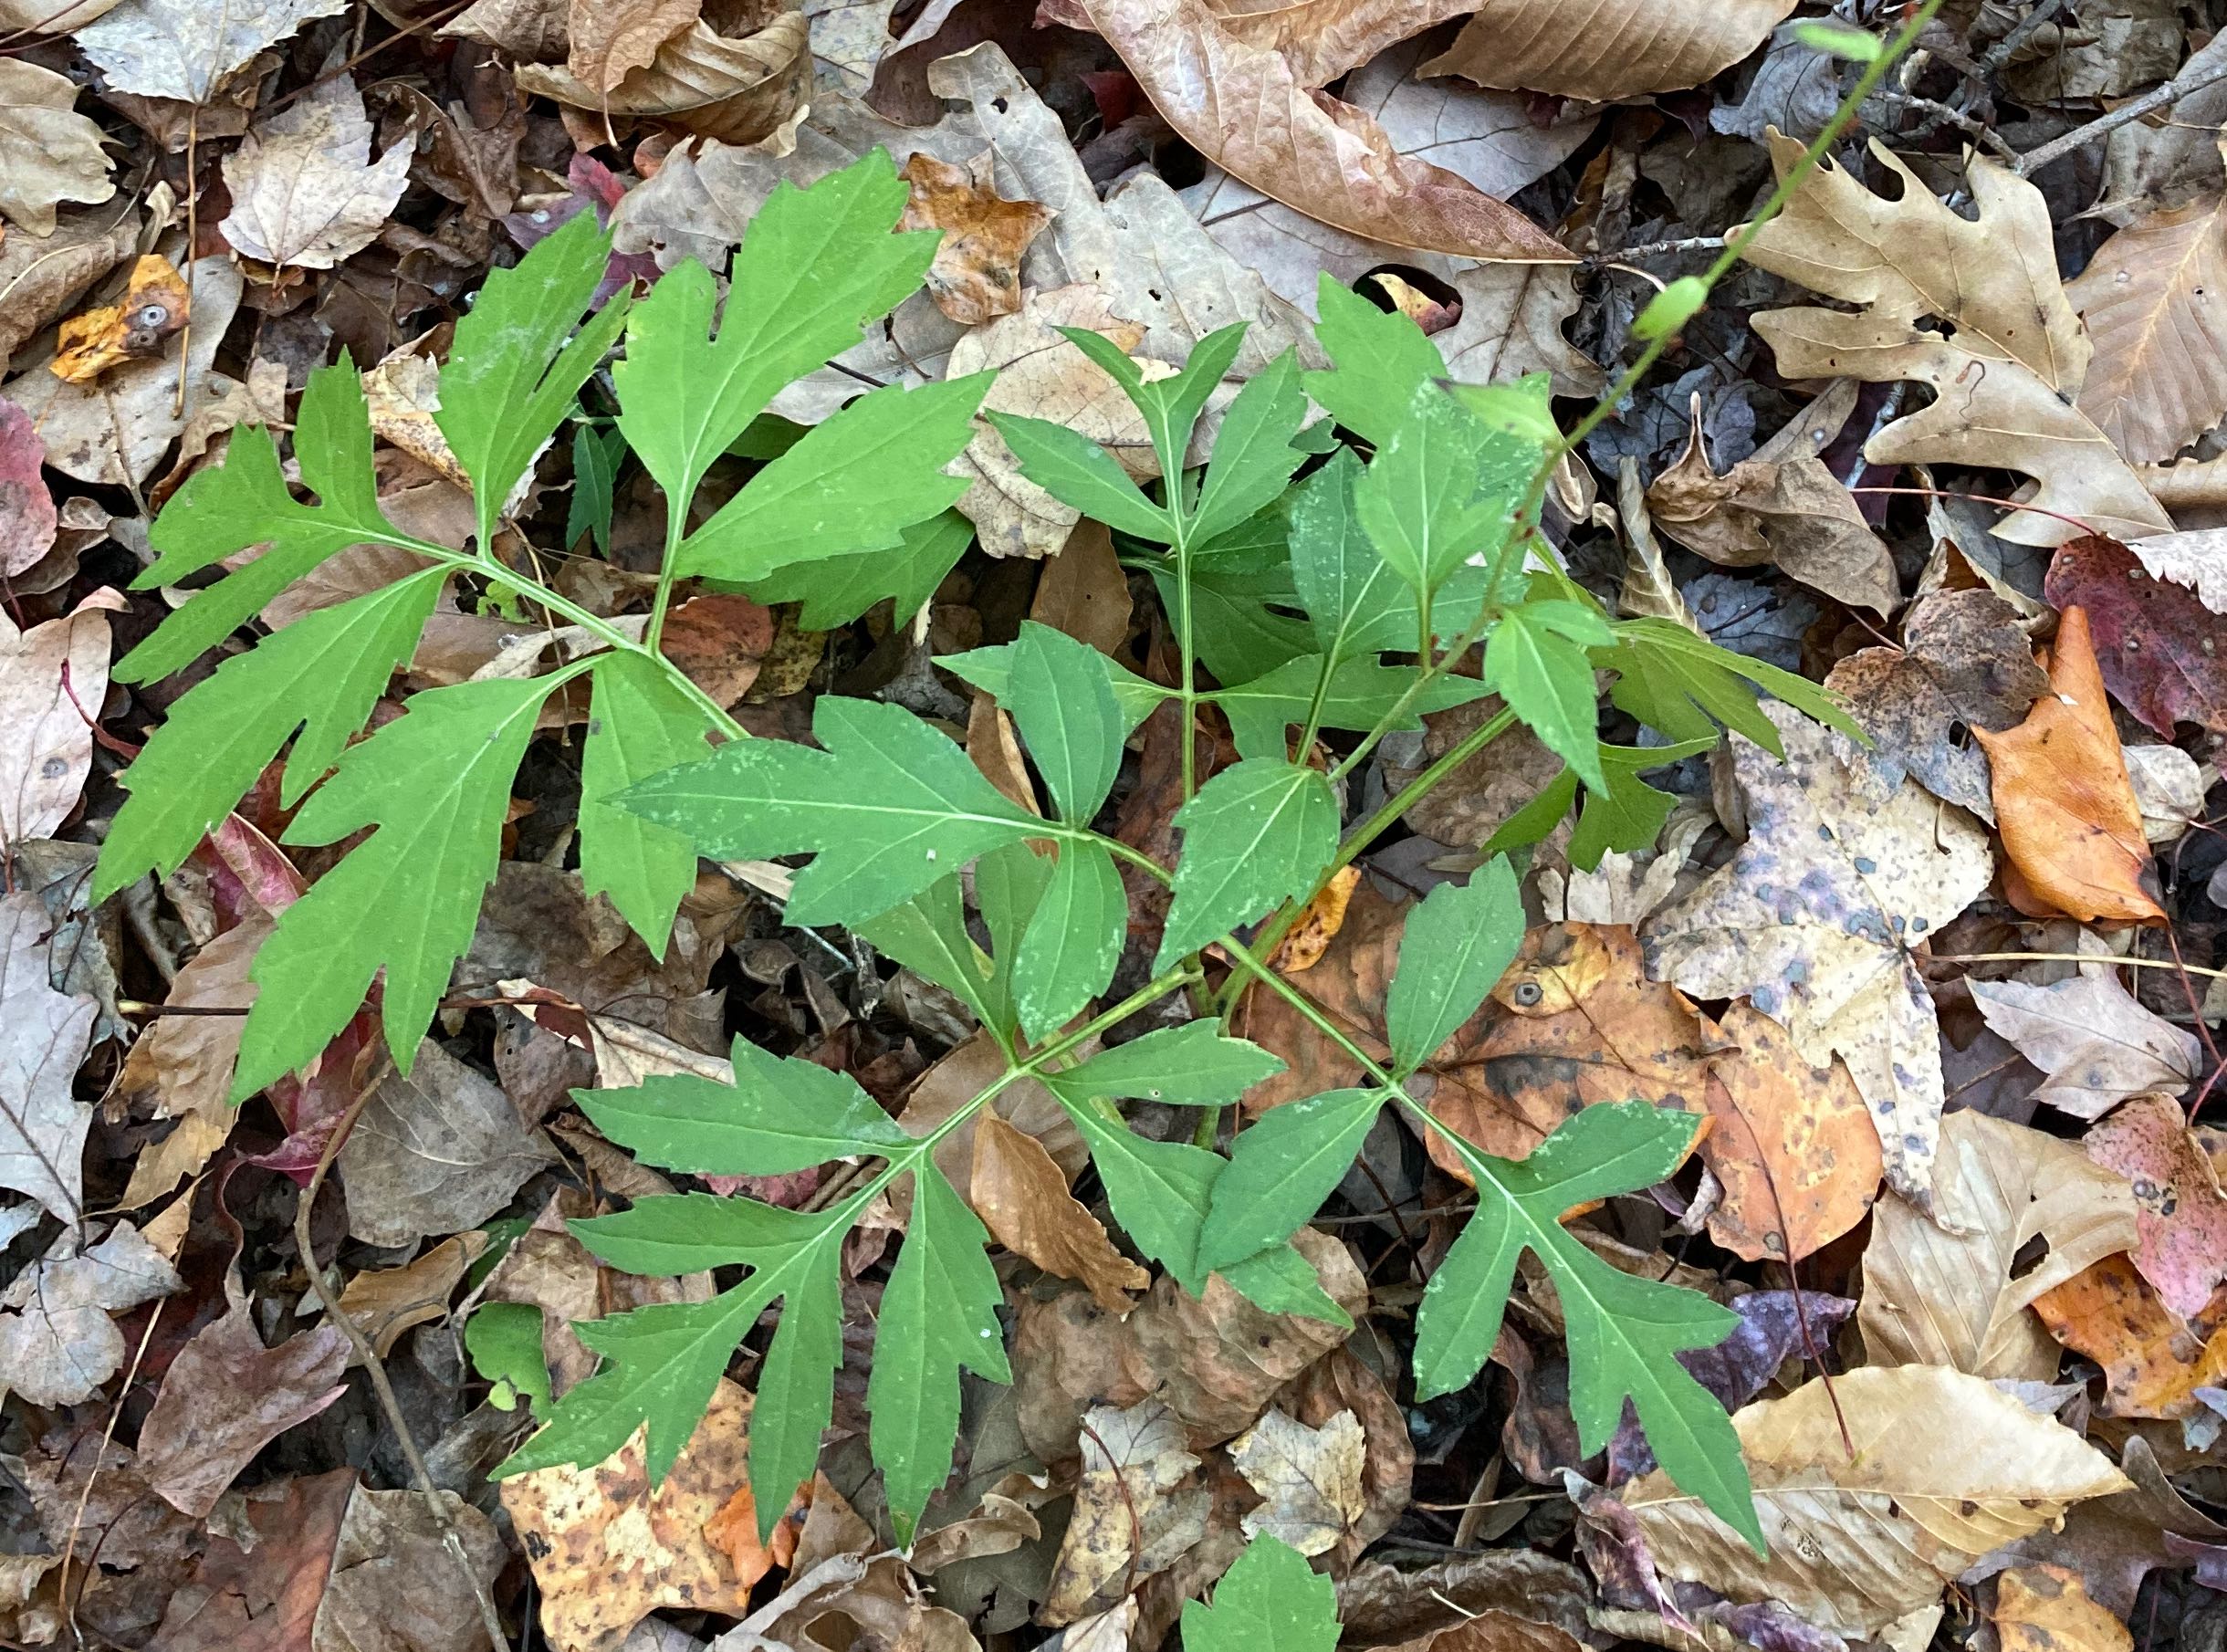 The Scientific Name is Rudbeckia laciniata. You will likely hear them called Cutleaf Coneflower, Goldenglow, Green-headed Coneflower, Sochan. This picture shows the  A rosette of basal leaves persists through the winter. of Rudbeckia laciniata